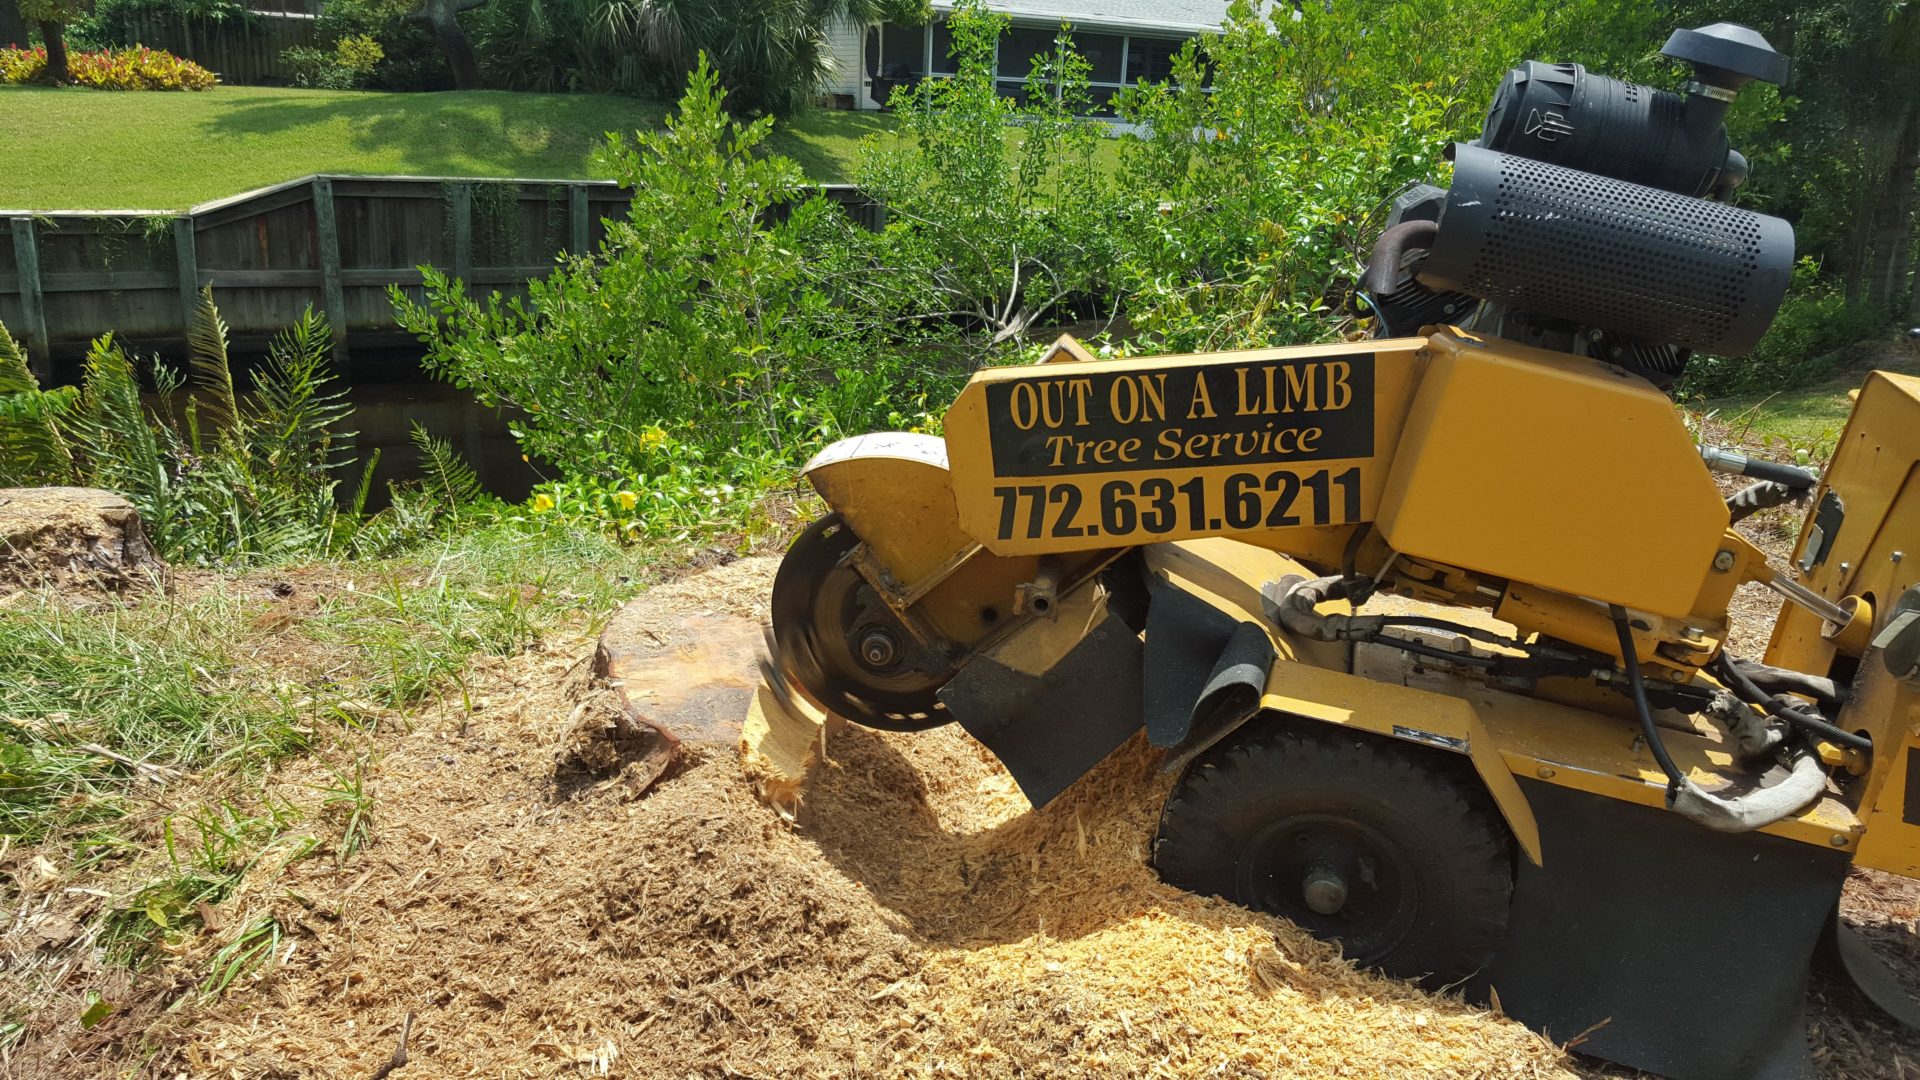 Stump Grinding Service Out On A Limb Tree Service